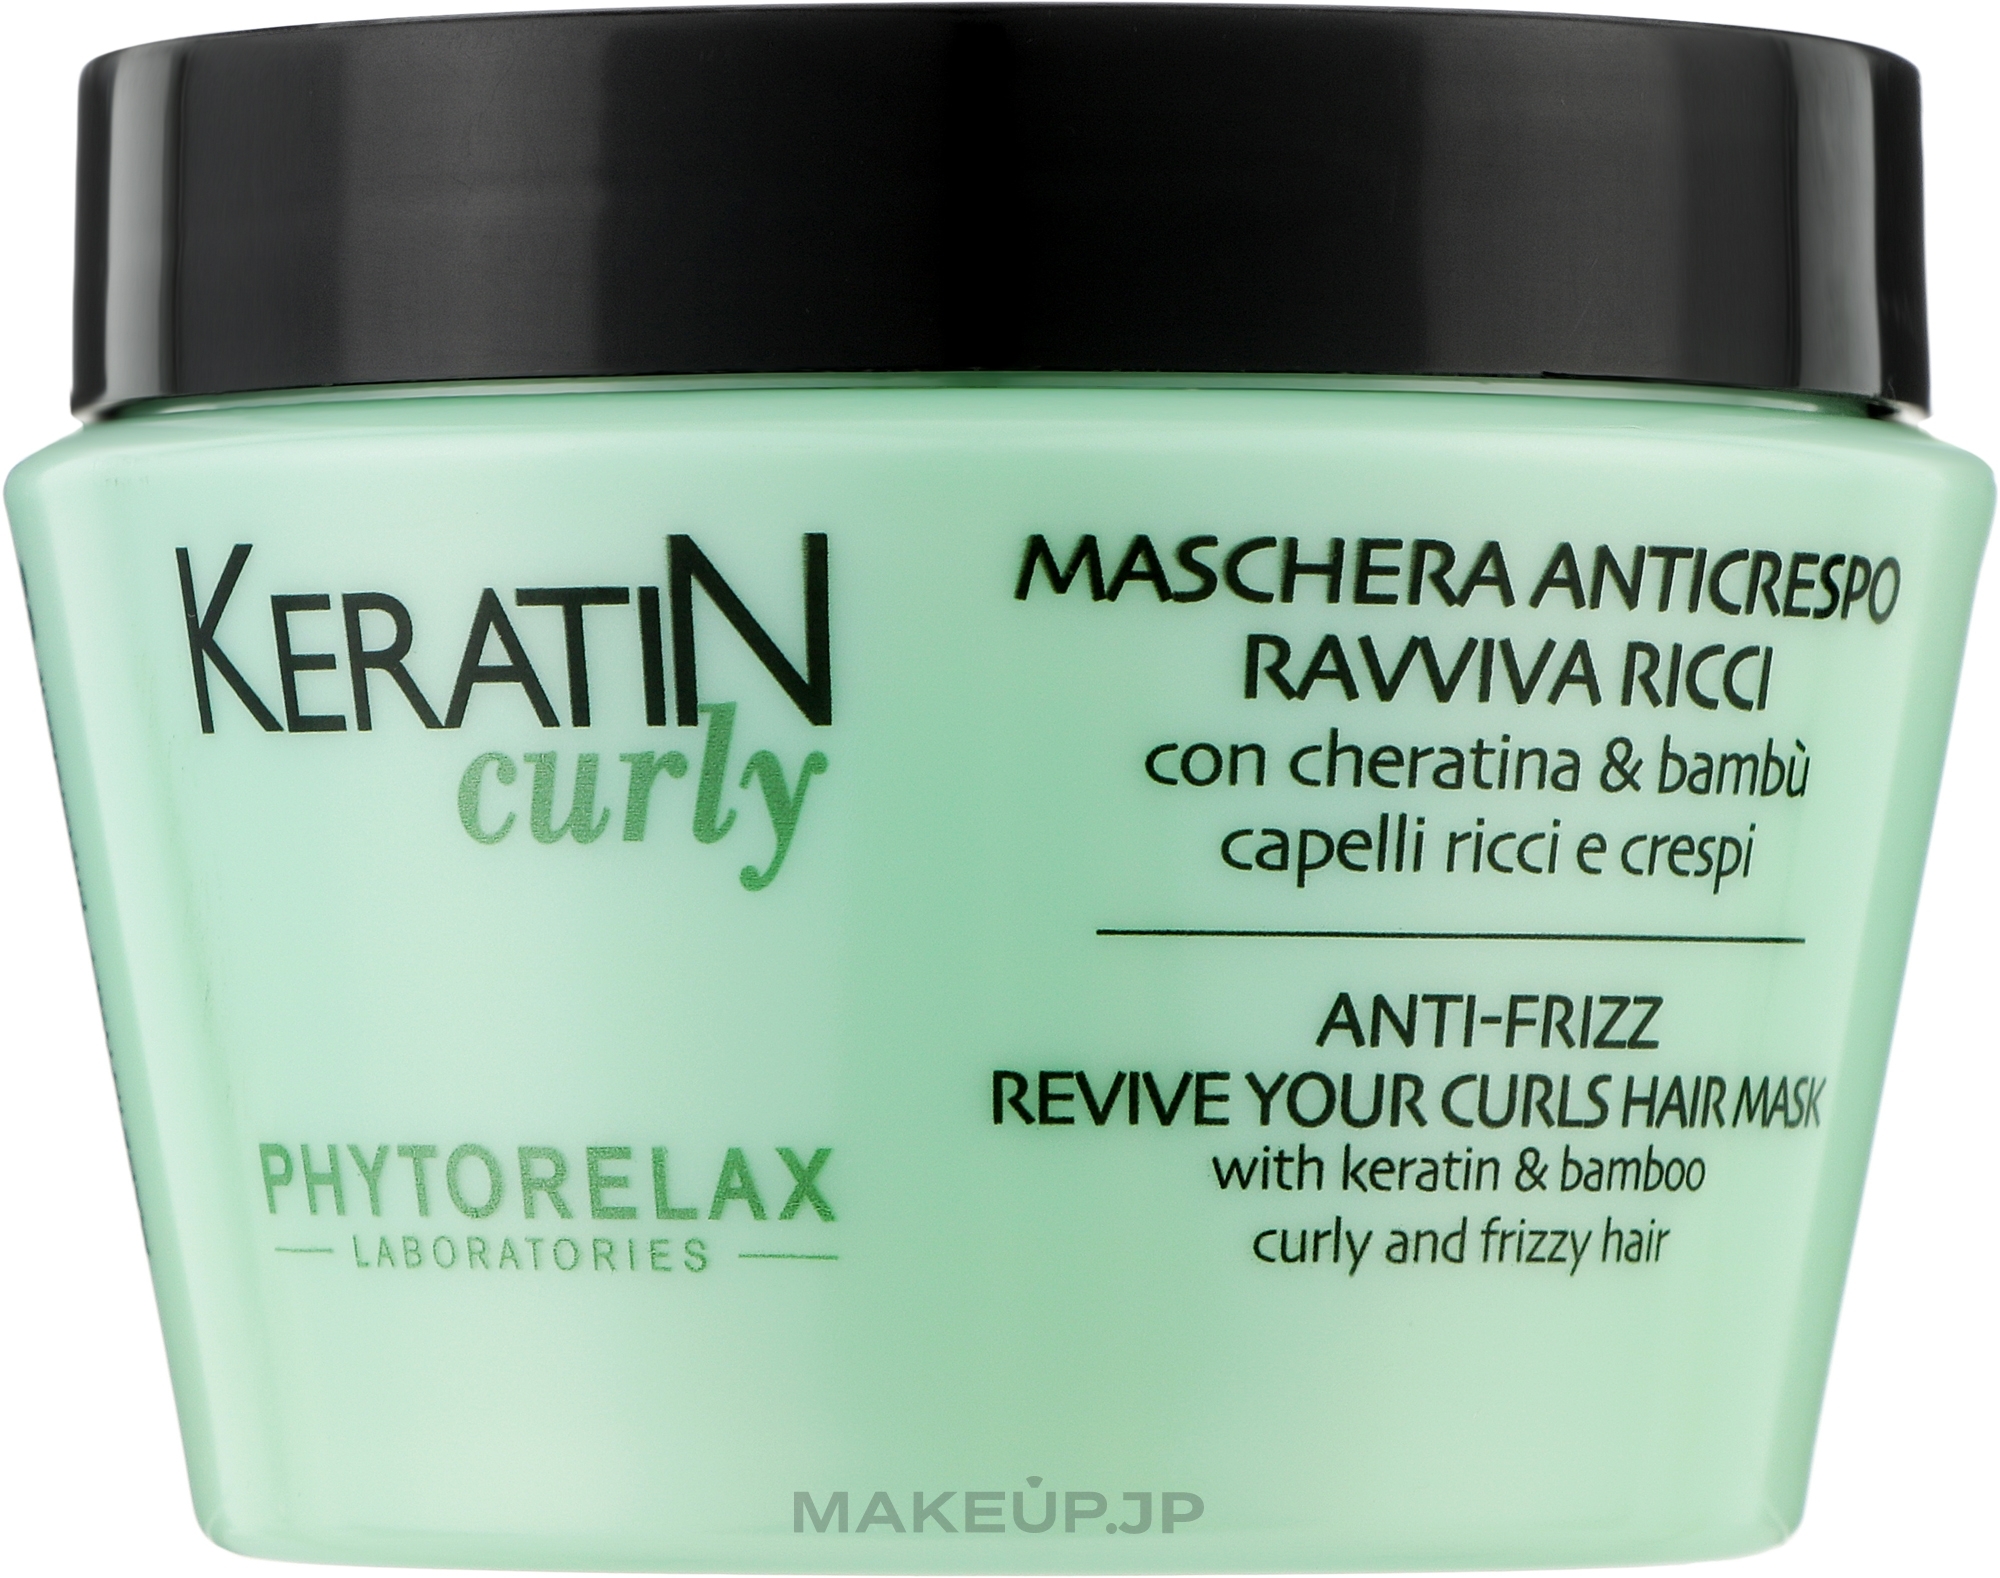 Curly Hair Mask - Phytorelax Laboratories Keratin Curly Anti-Frizz Revive Your Curls Hair Mask — photo 250 ml